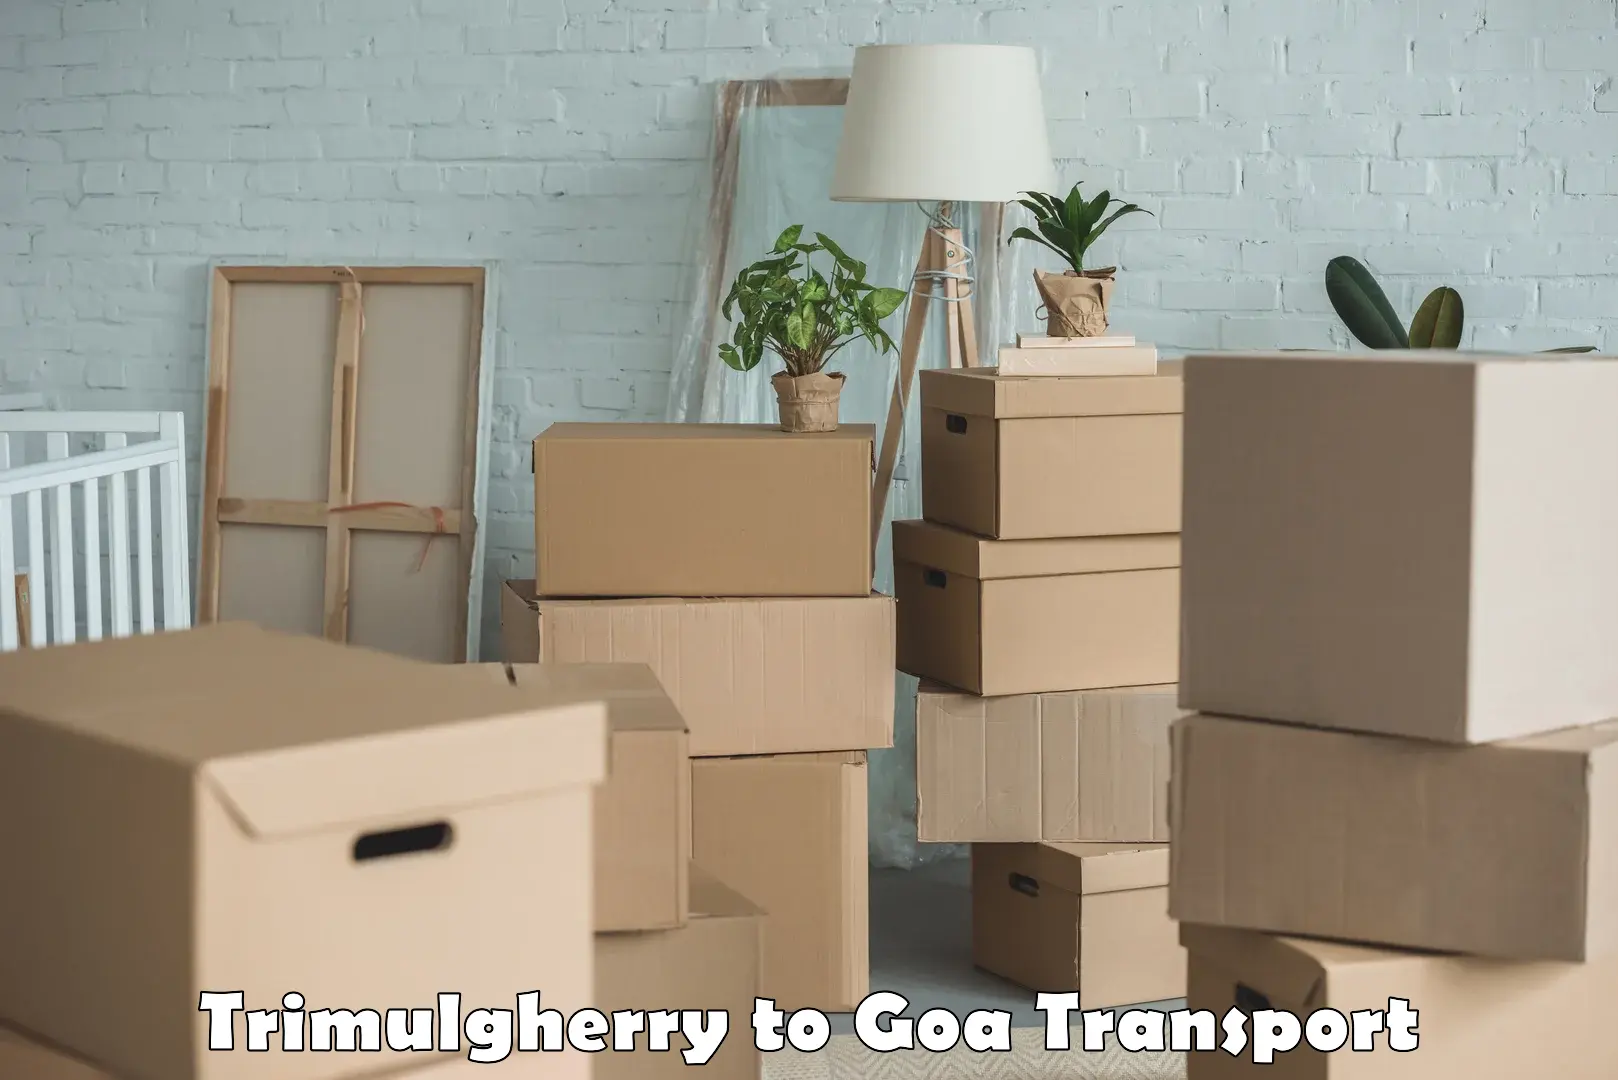 Container transport service Trimulgherry to Goa University